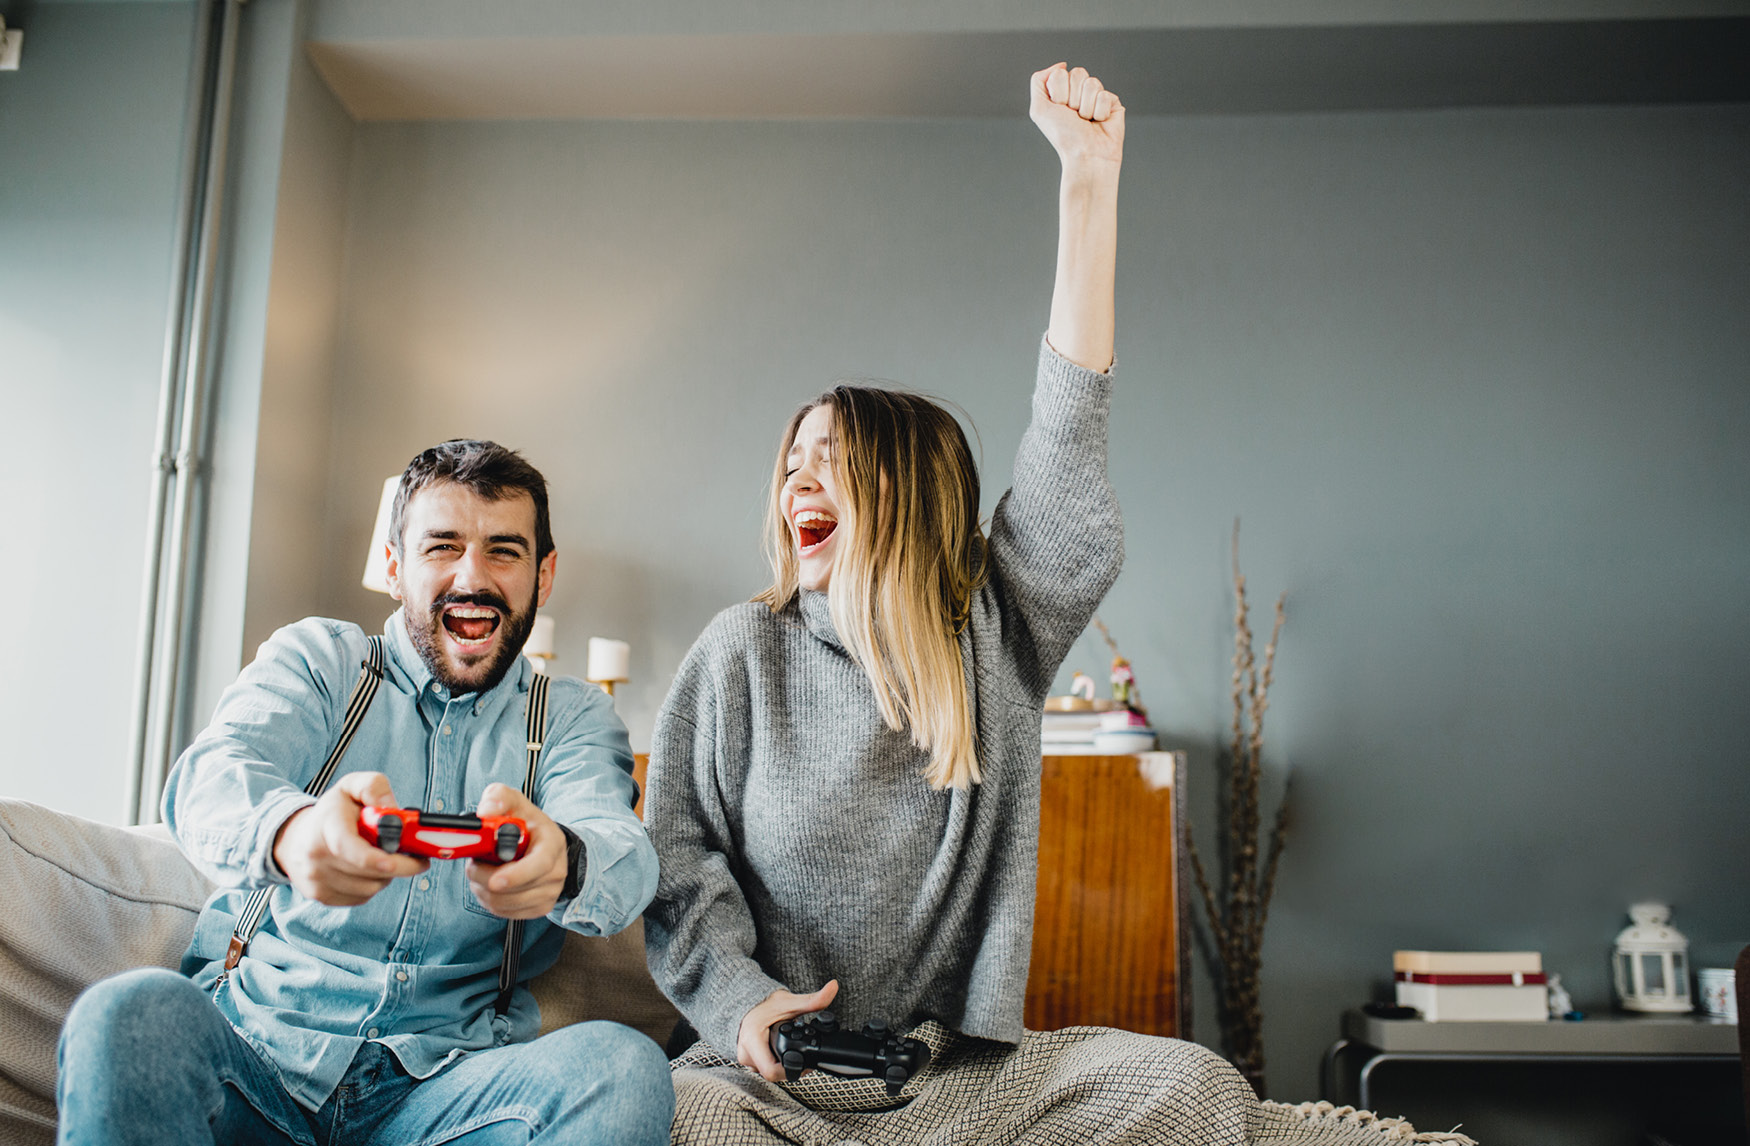 Clearewave Fiber website photography — two people playing video games with high speed internet connection